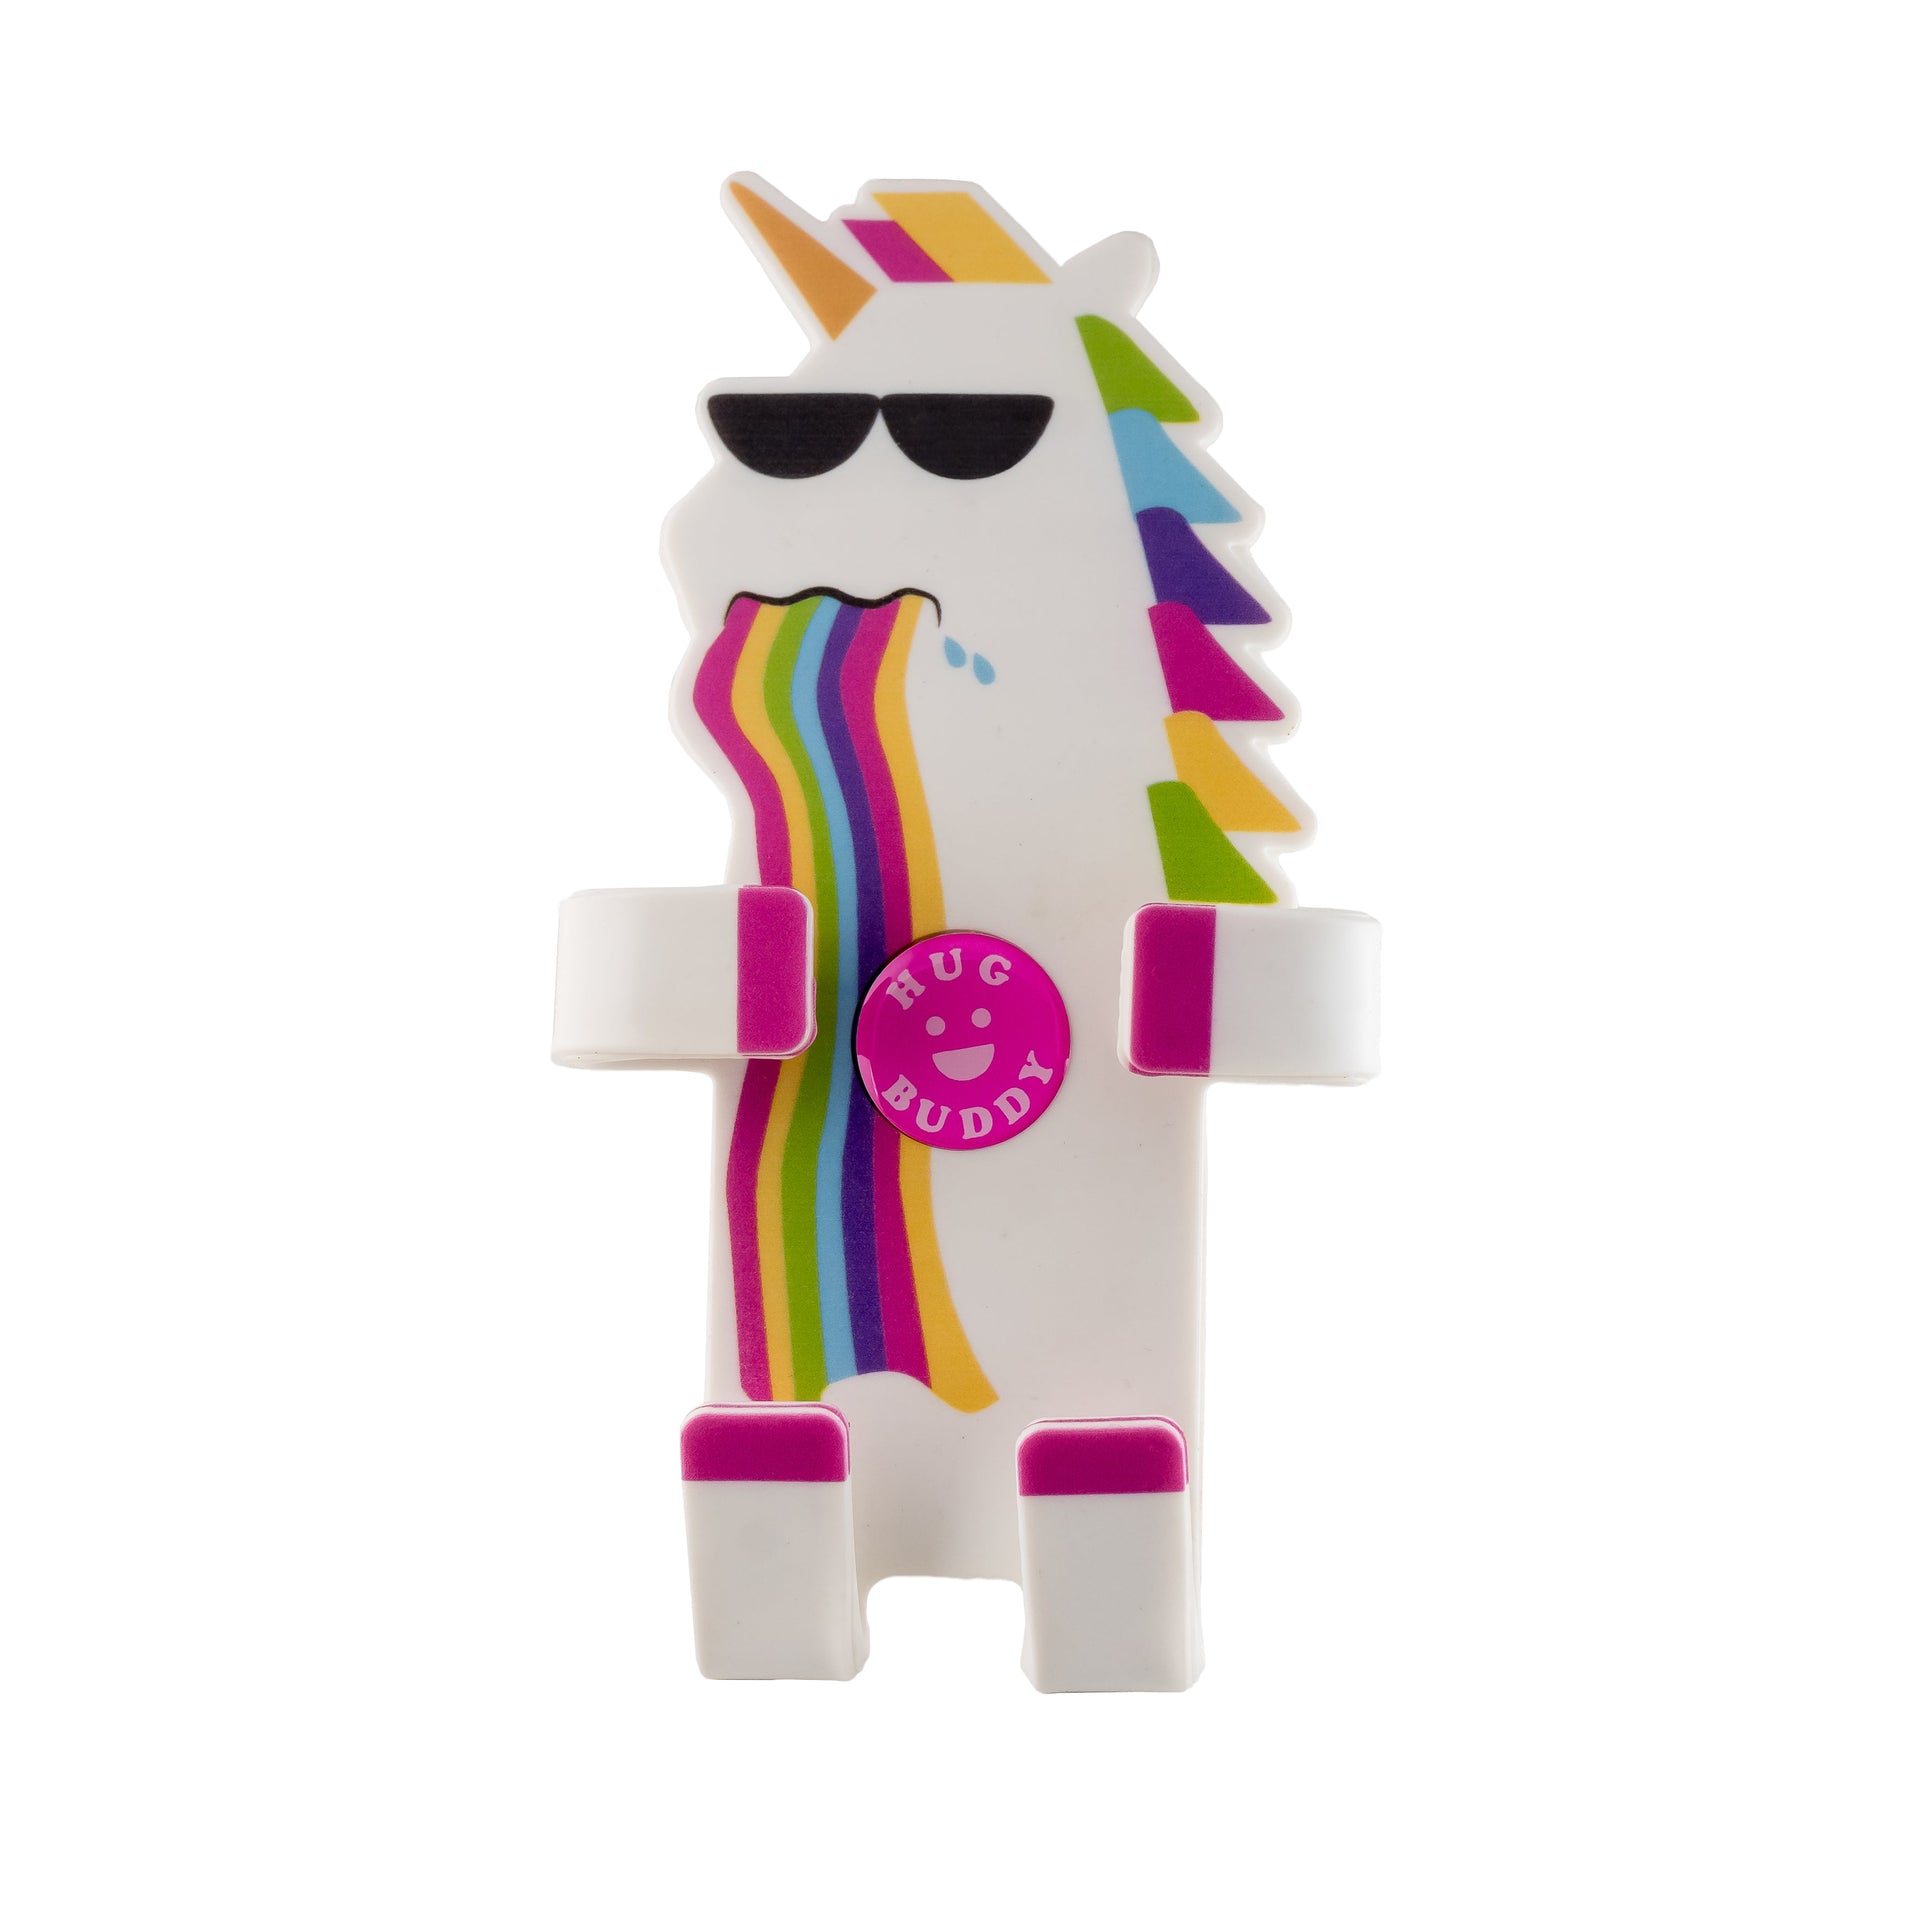 Image of Pukeycorn the unicorn Hug Buddy with arms and legs in the folded closed position on a white background